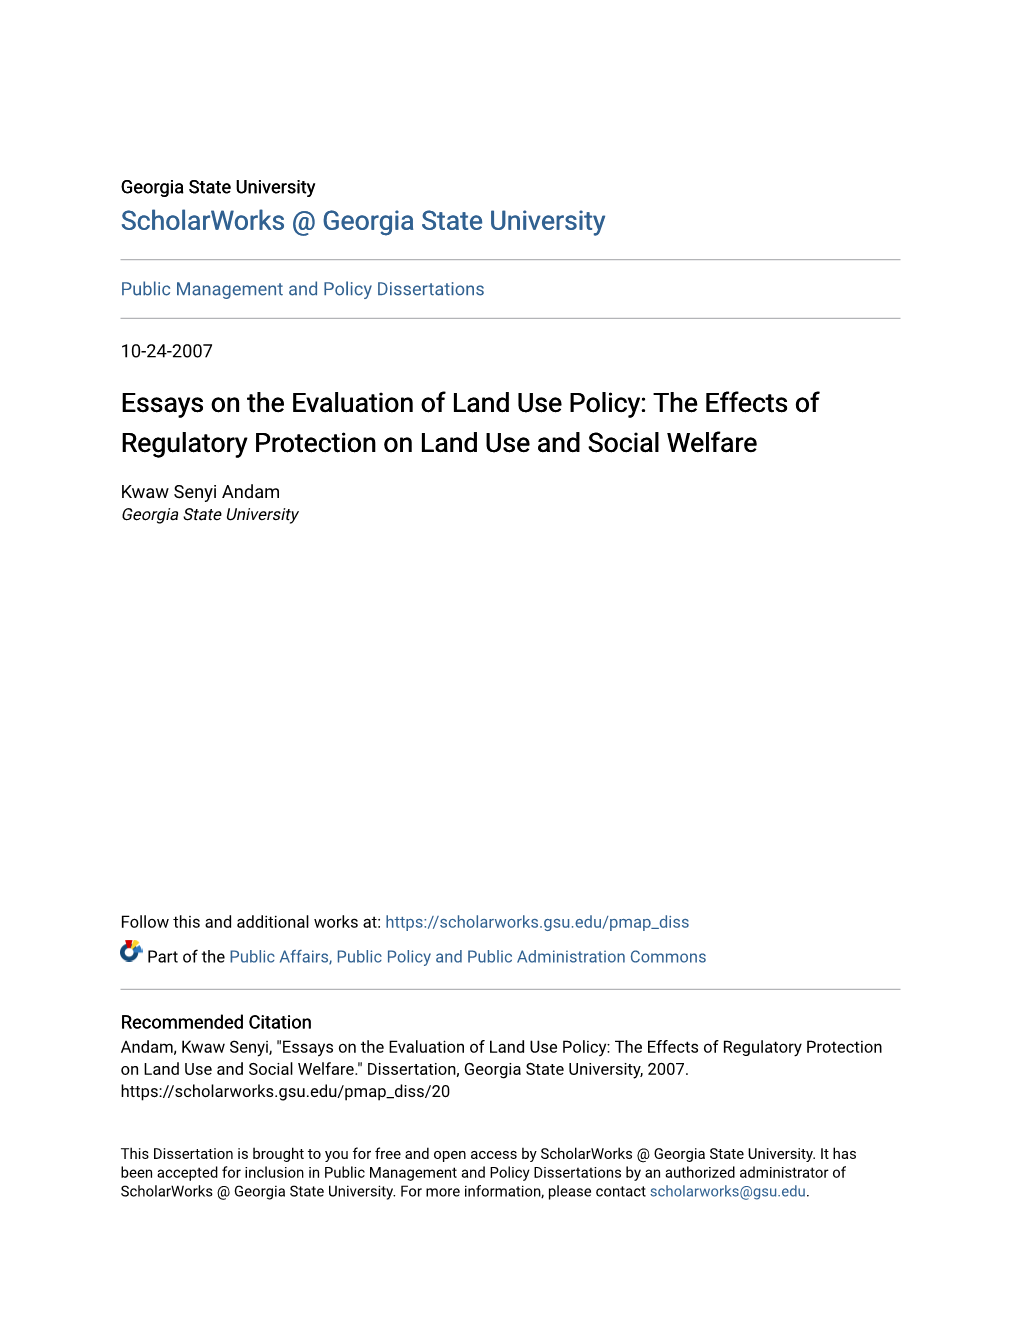 Essays on the Evaluation of Land Use Policy: the Effects of Regulatory Protection on Land Use and Social Welfare